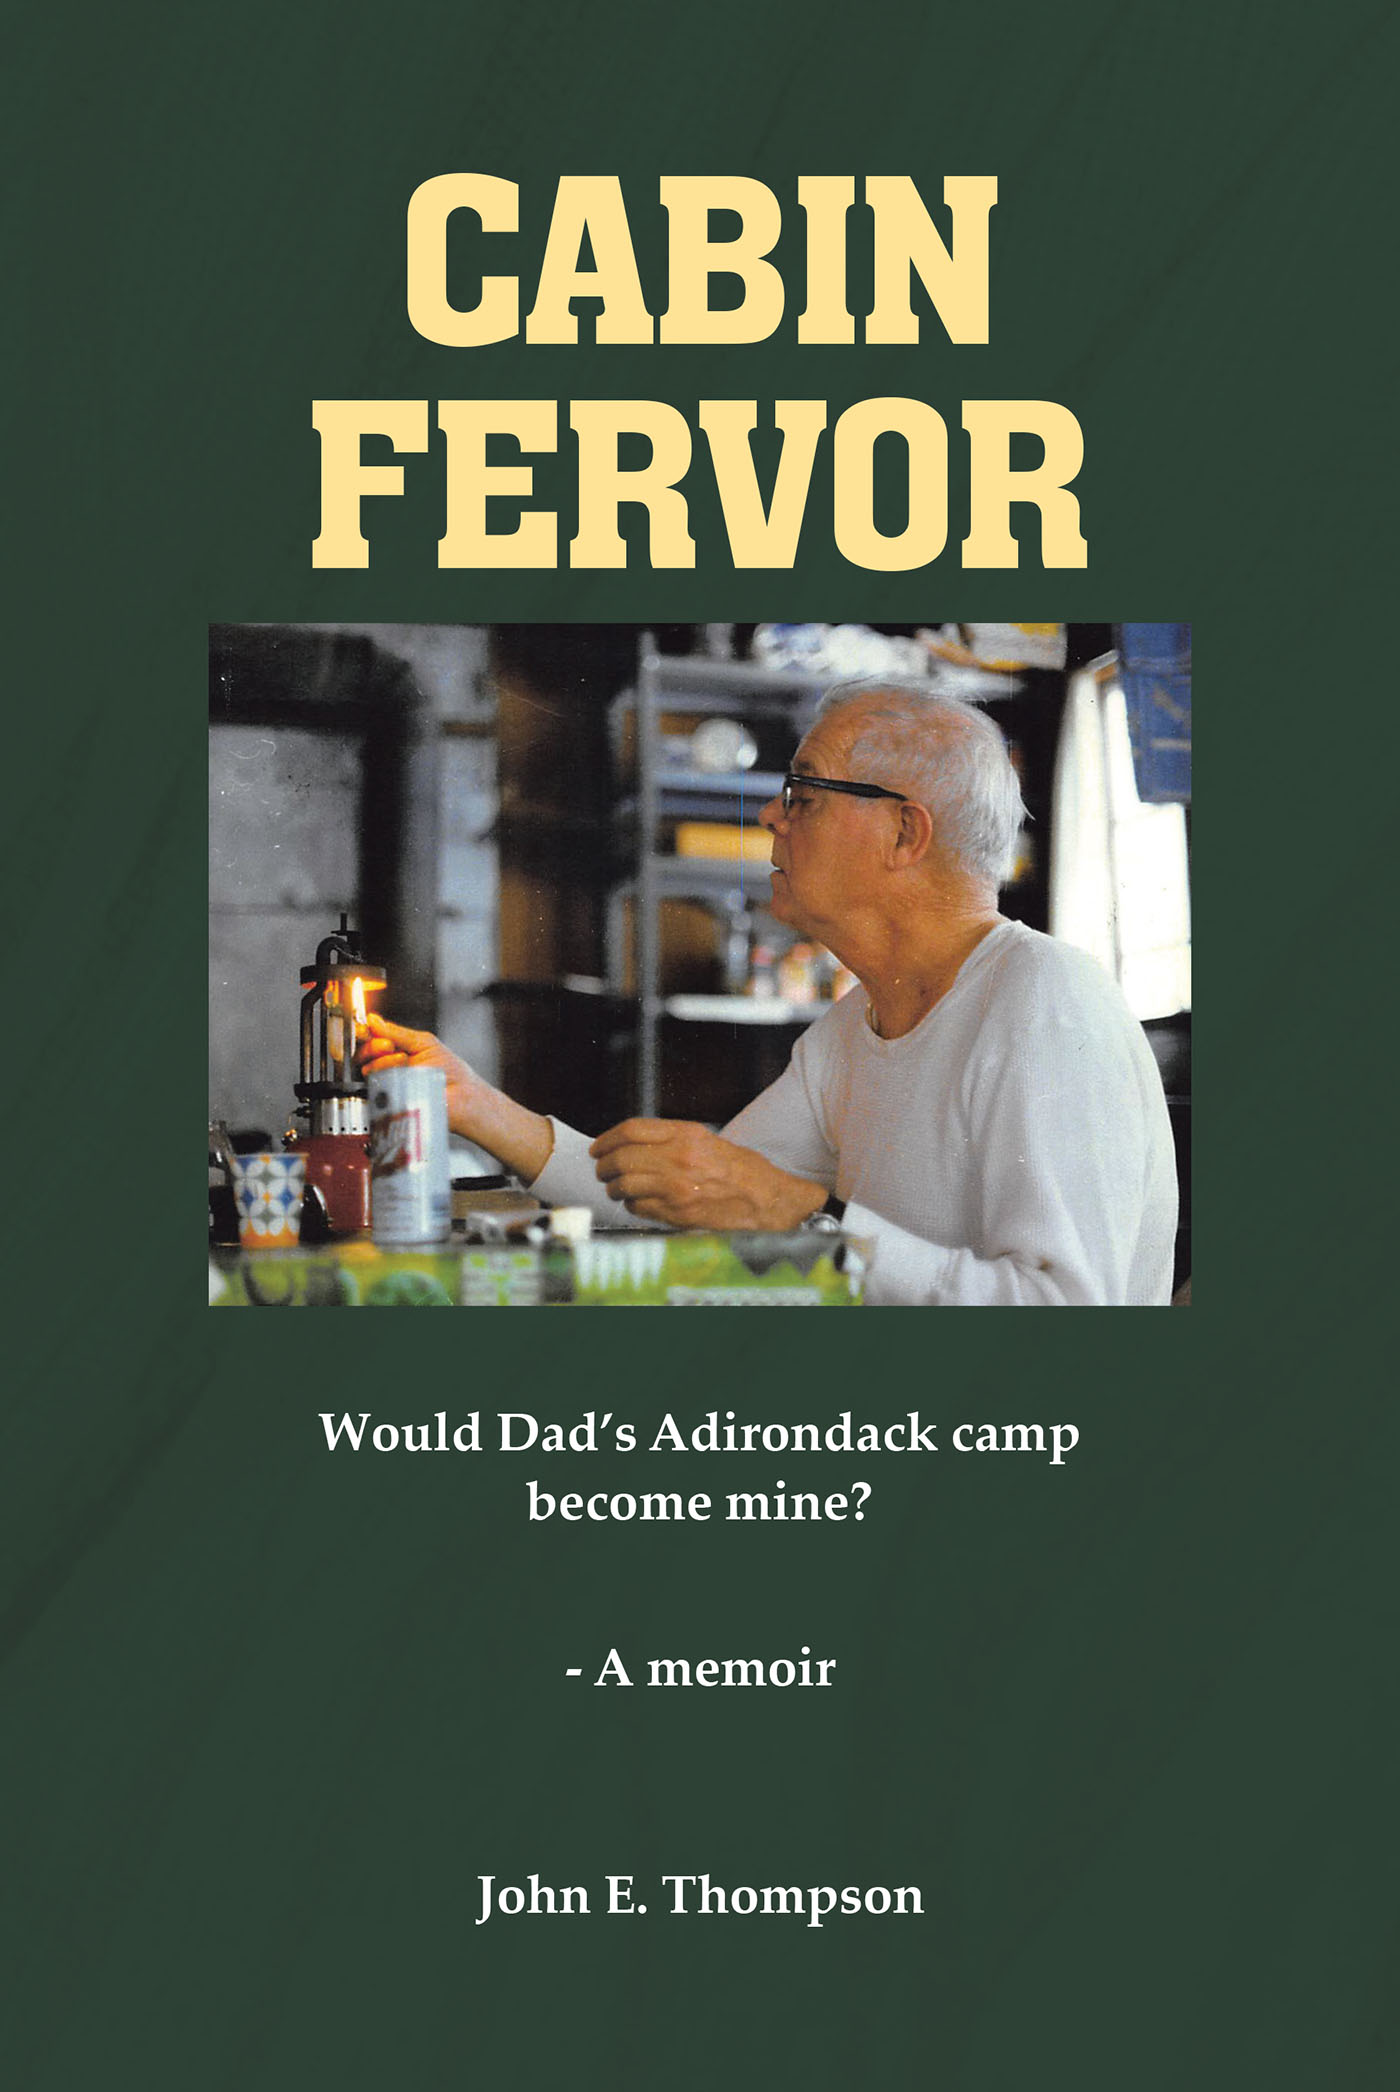 Author John E. Thompson’s New Book, "Cabin Fervor," is a Heartwarming Tribute to the Author's Father and Their Countless Trips to His Cabin in the Adirondacks